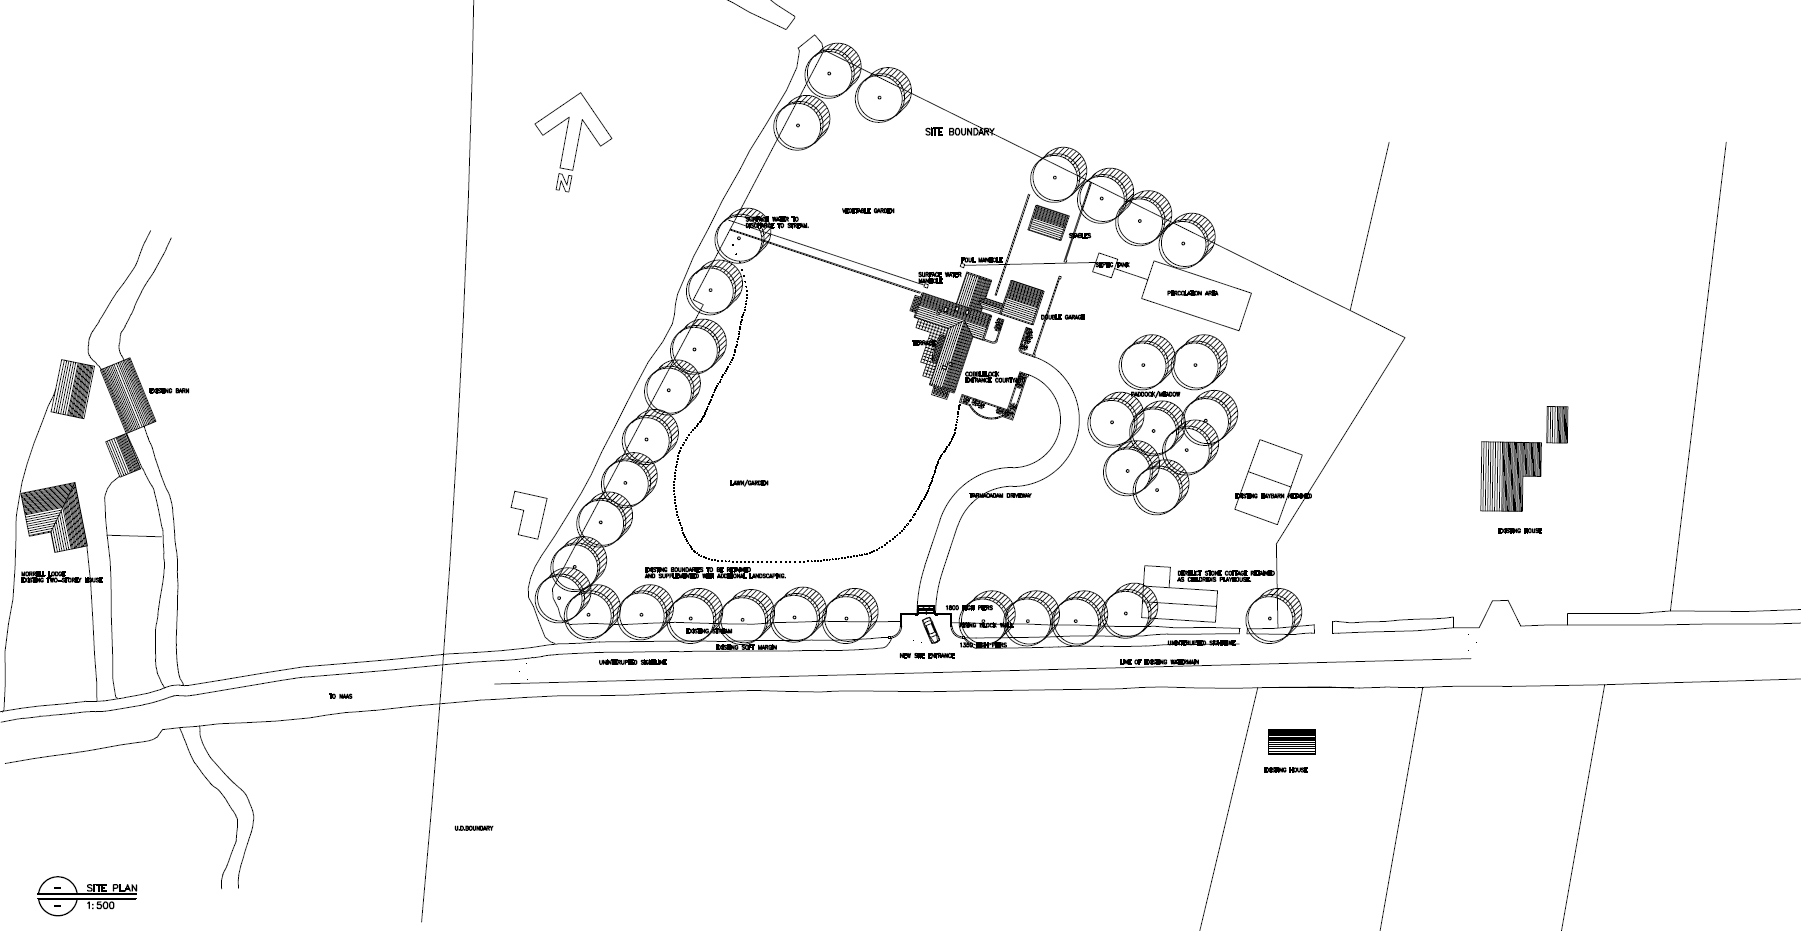 SITE LAYOUT